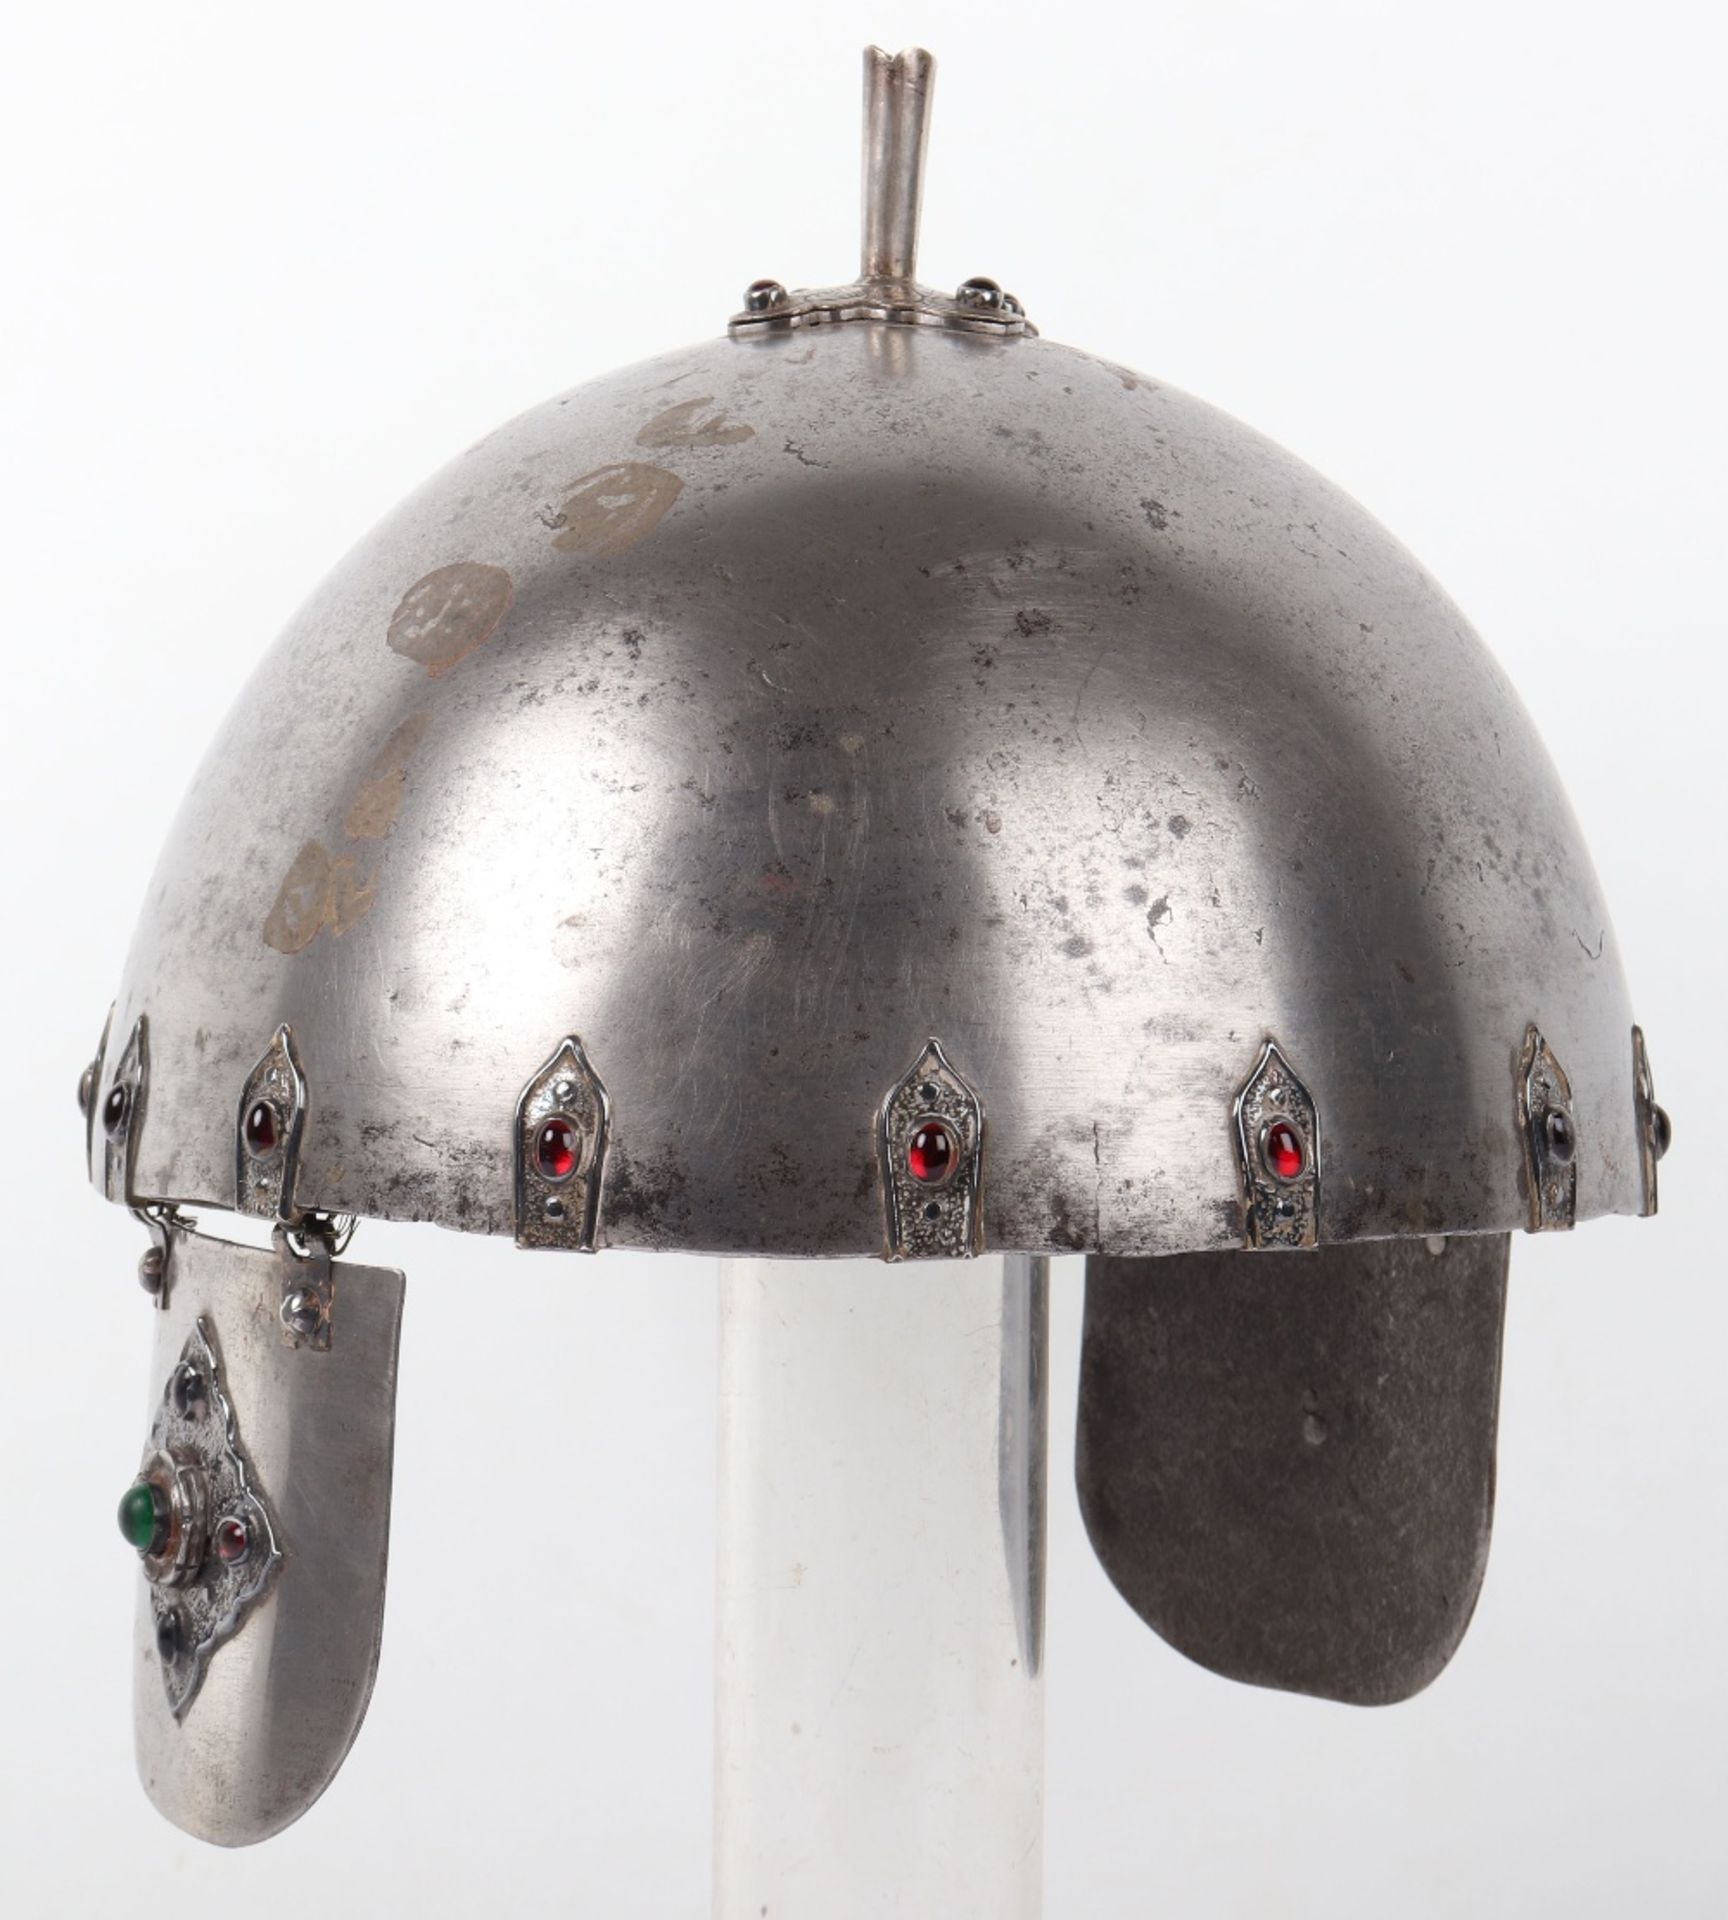 Bhutanese Helmet Possibly 18th or 19th Century - Image 6 of 15